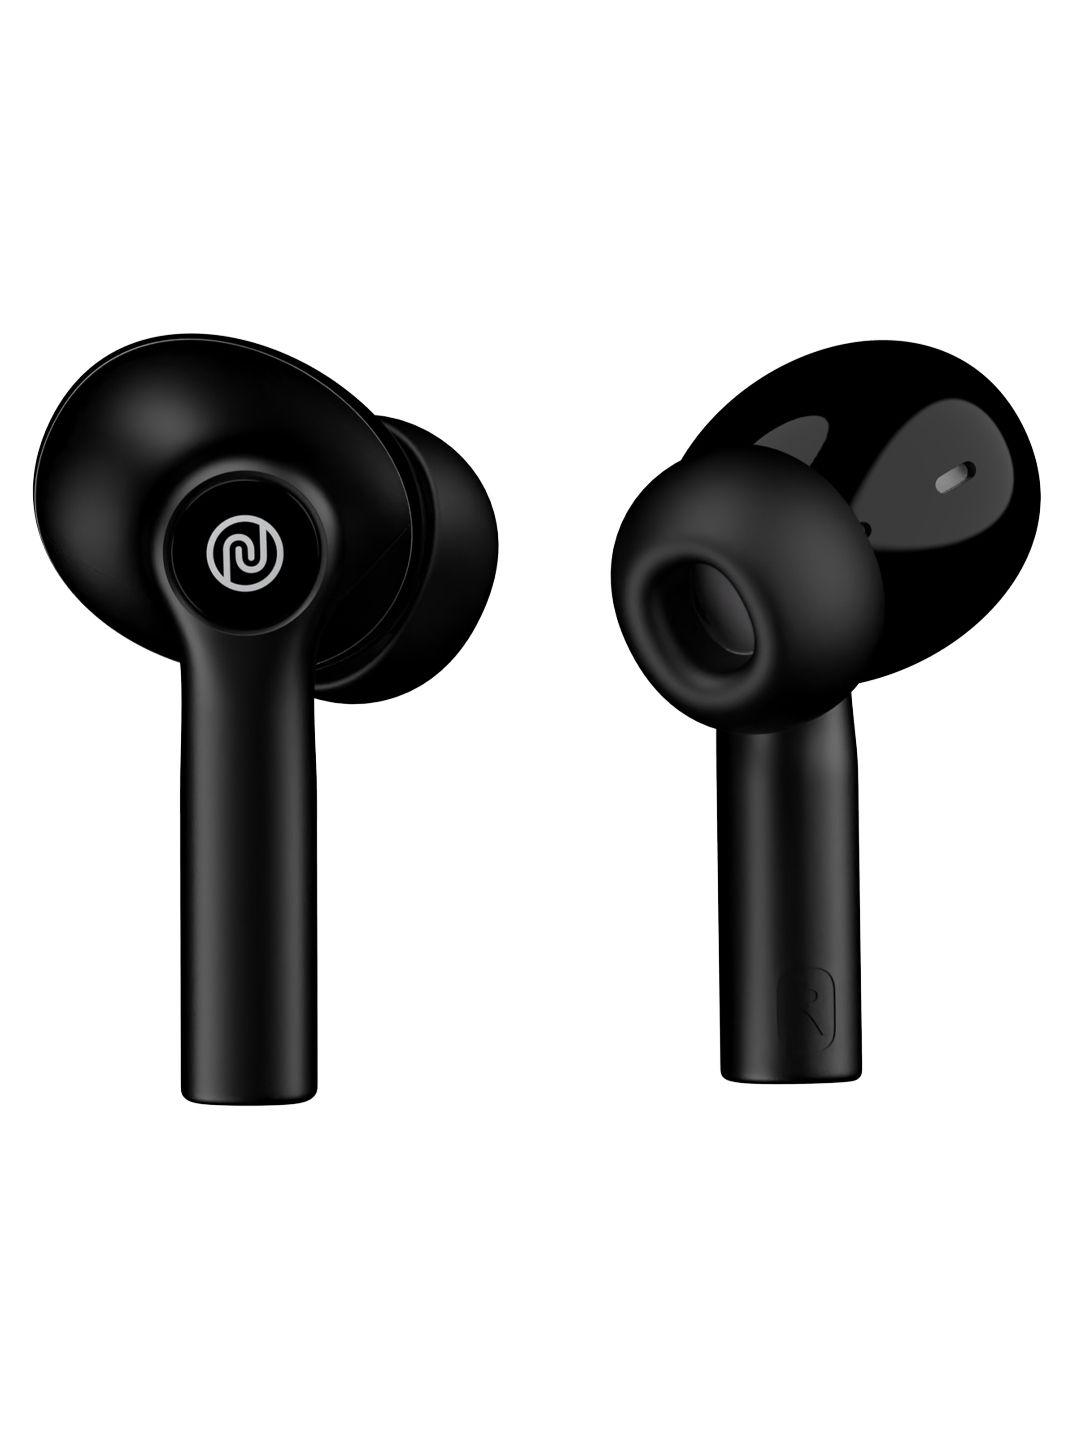 NOISE Buds VS103 M Truly Wireless Earbuds with HyperSync - Jet Black